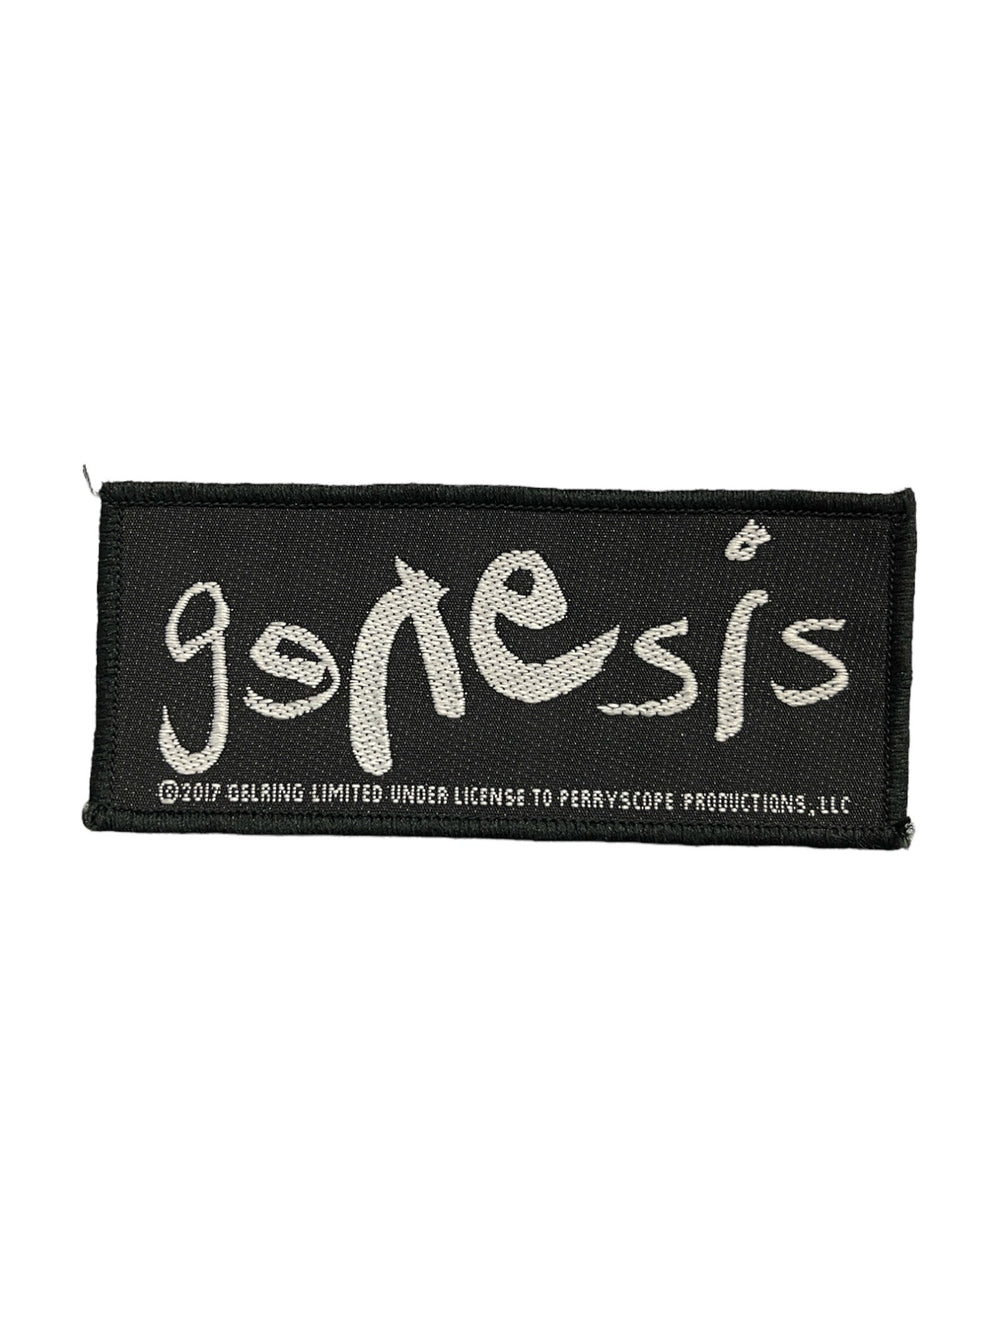 Genesis Logo Name Official Woven Patch Brand New